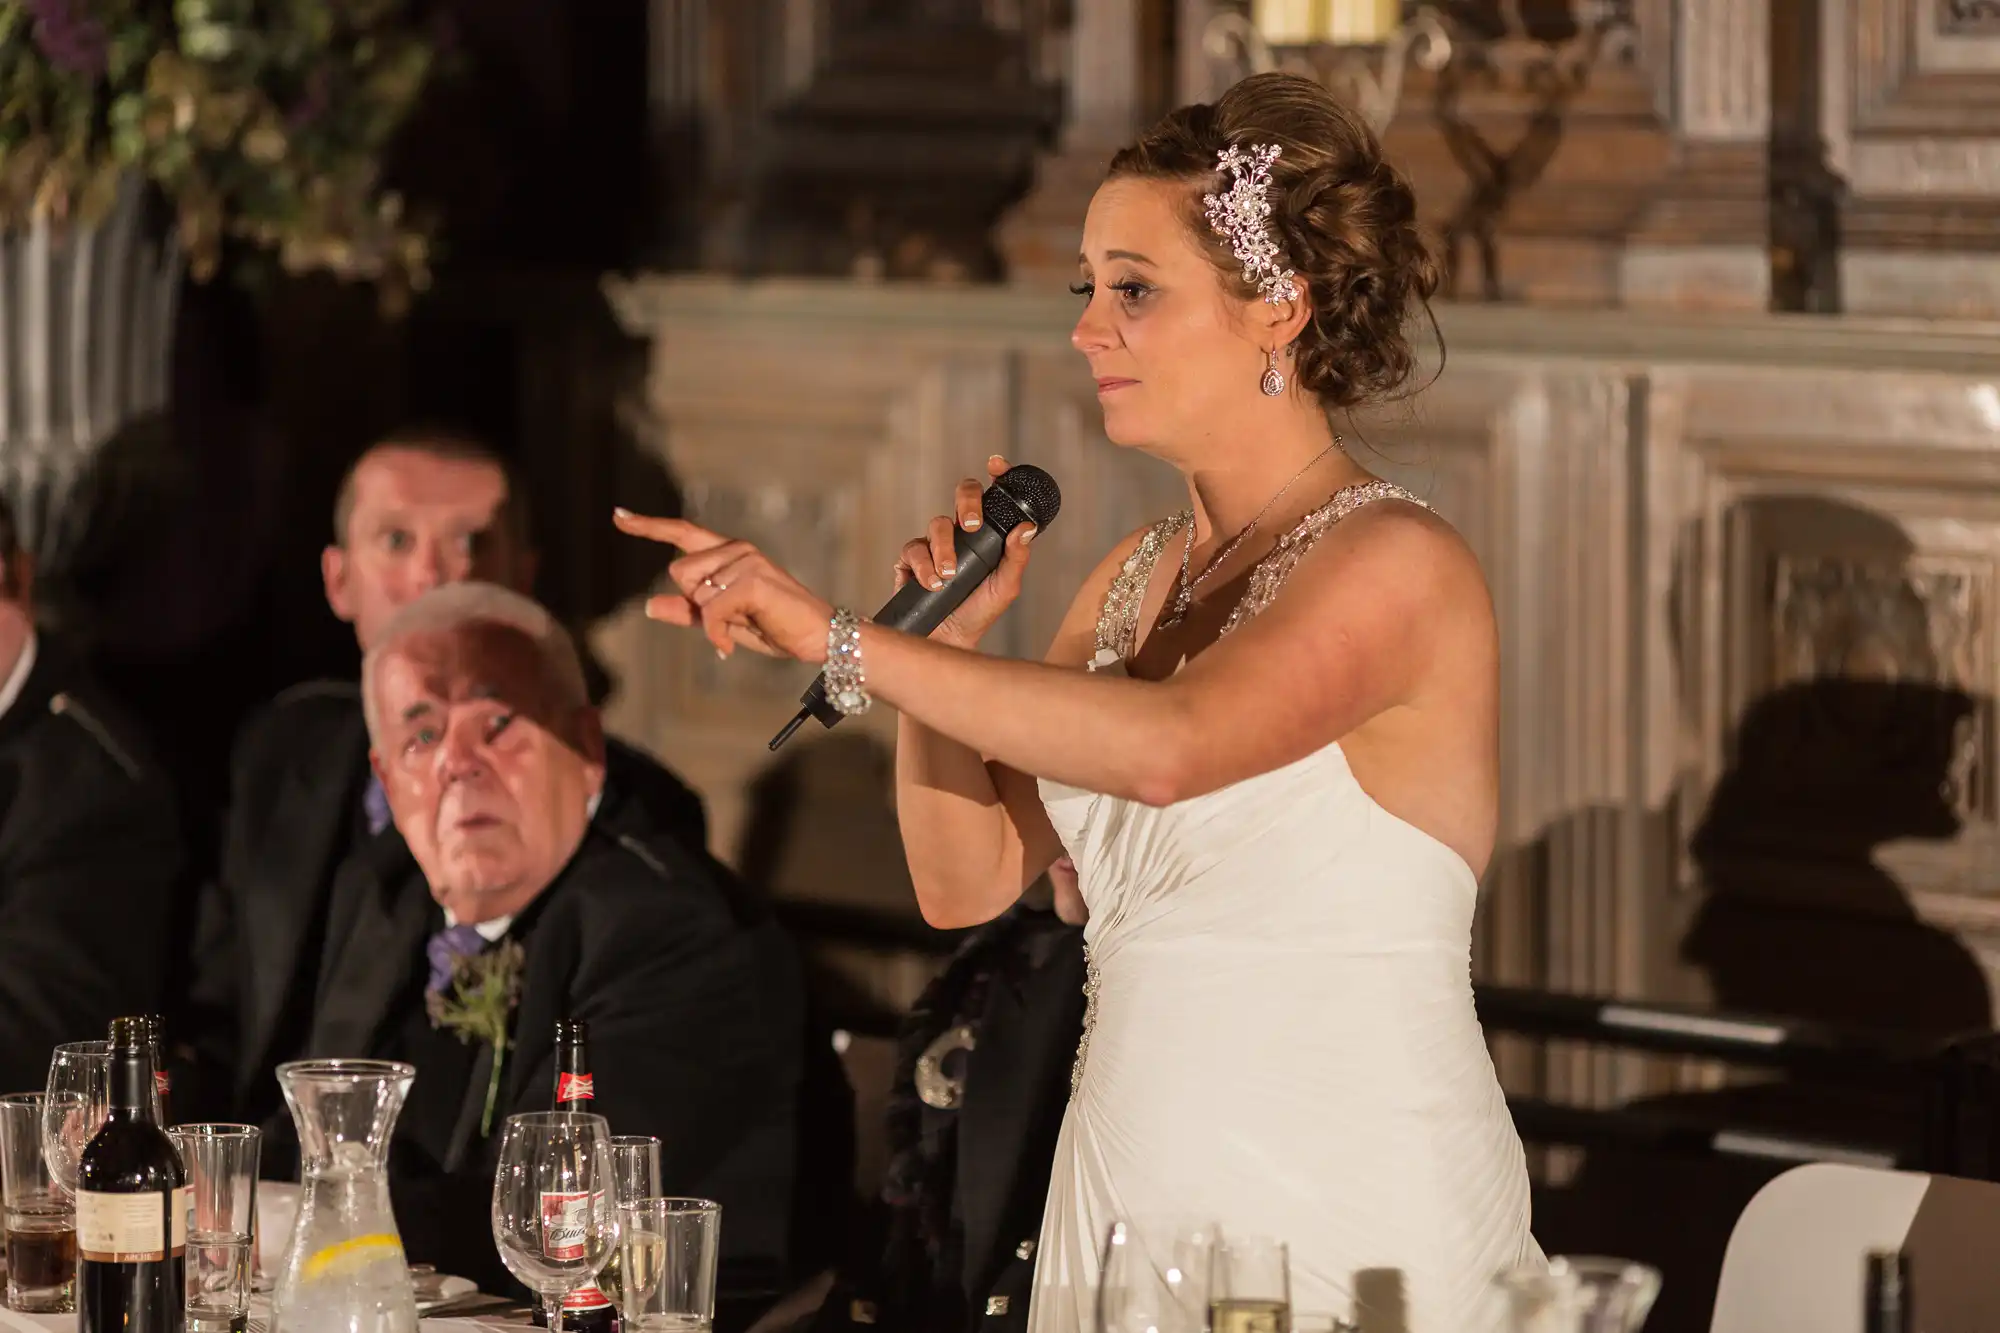 Bride in white dress giving a speech with a microphone, pointing at someone, at a wedding reception indoors.